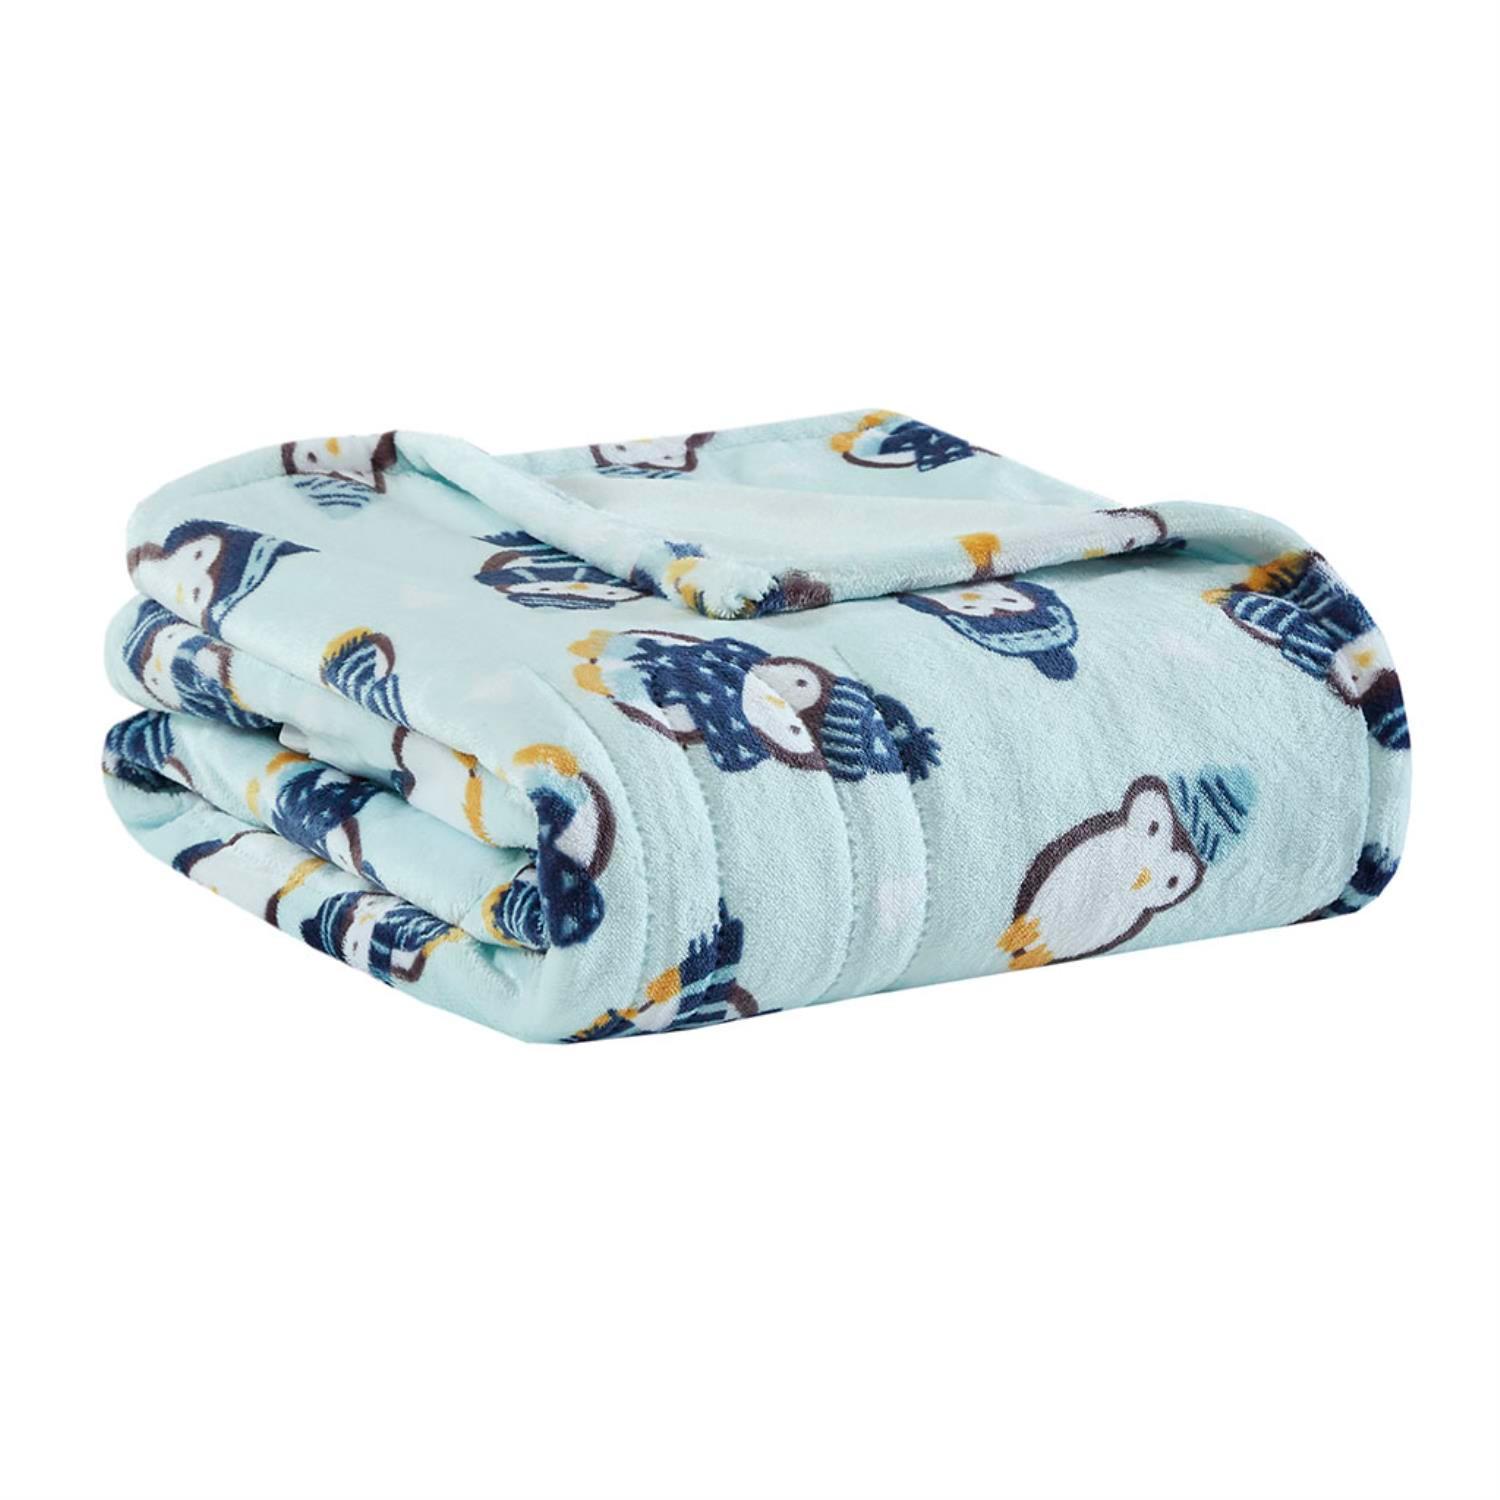 Beautyrest Polyester Microlight Heated Throw In Aqua Penguins Finish BR54-1157